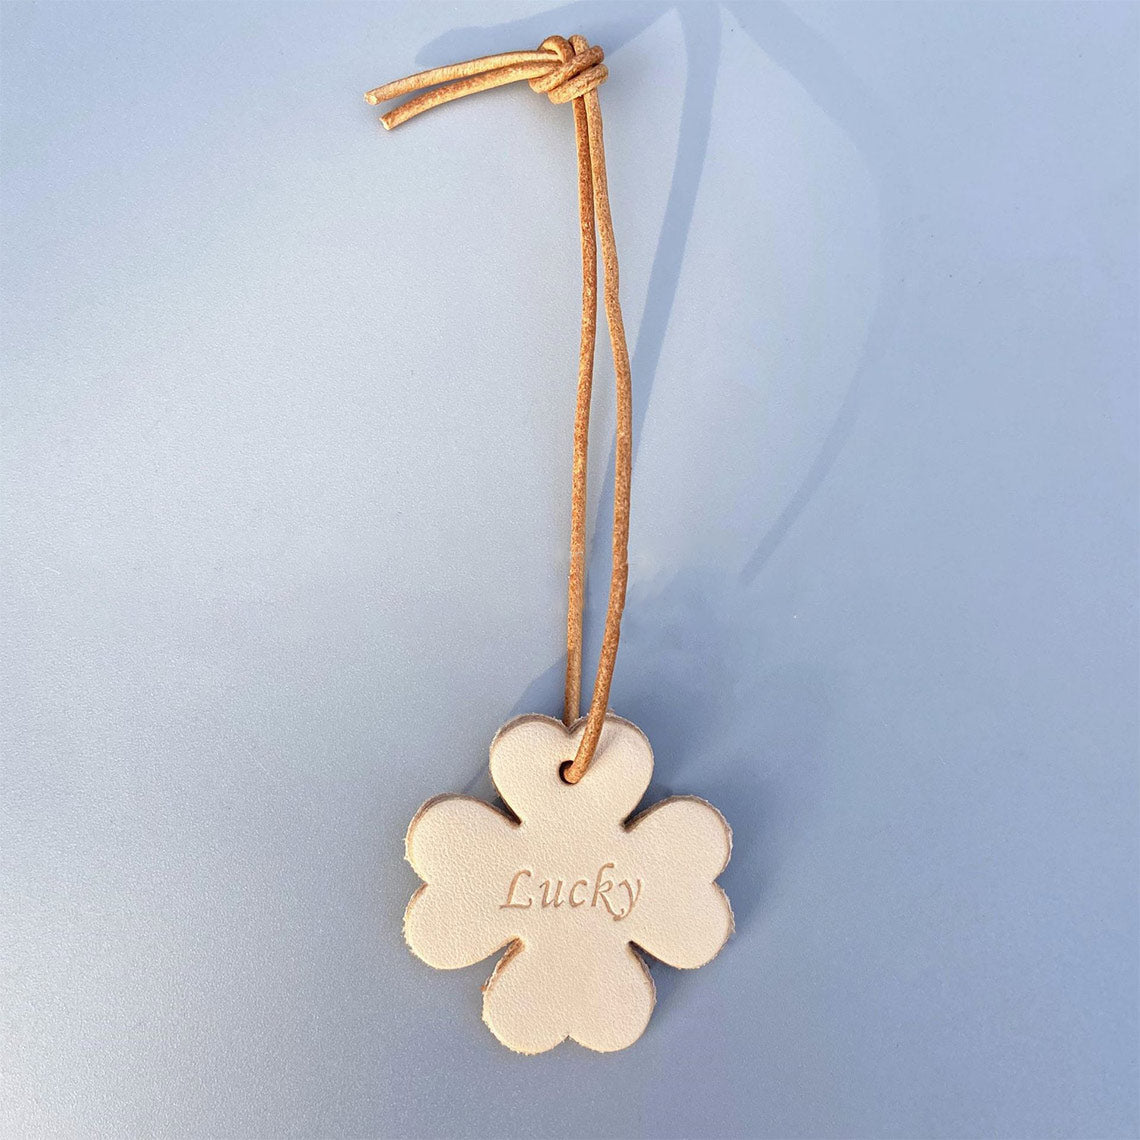 Vegetable Tanned Leather Lucky Clover Charm